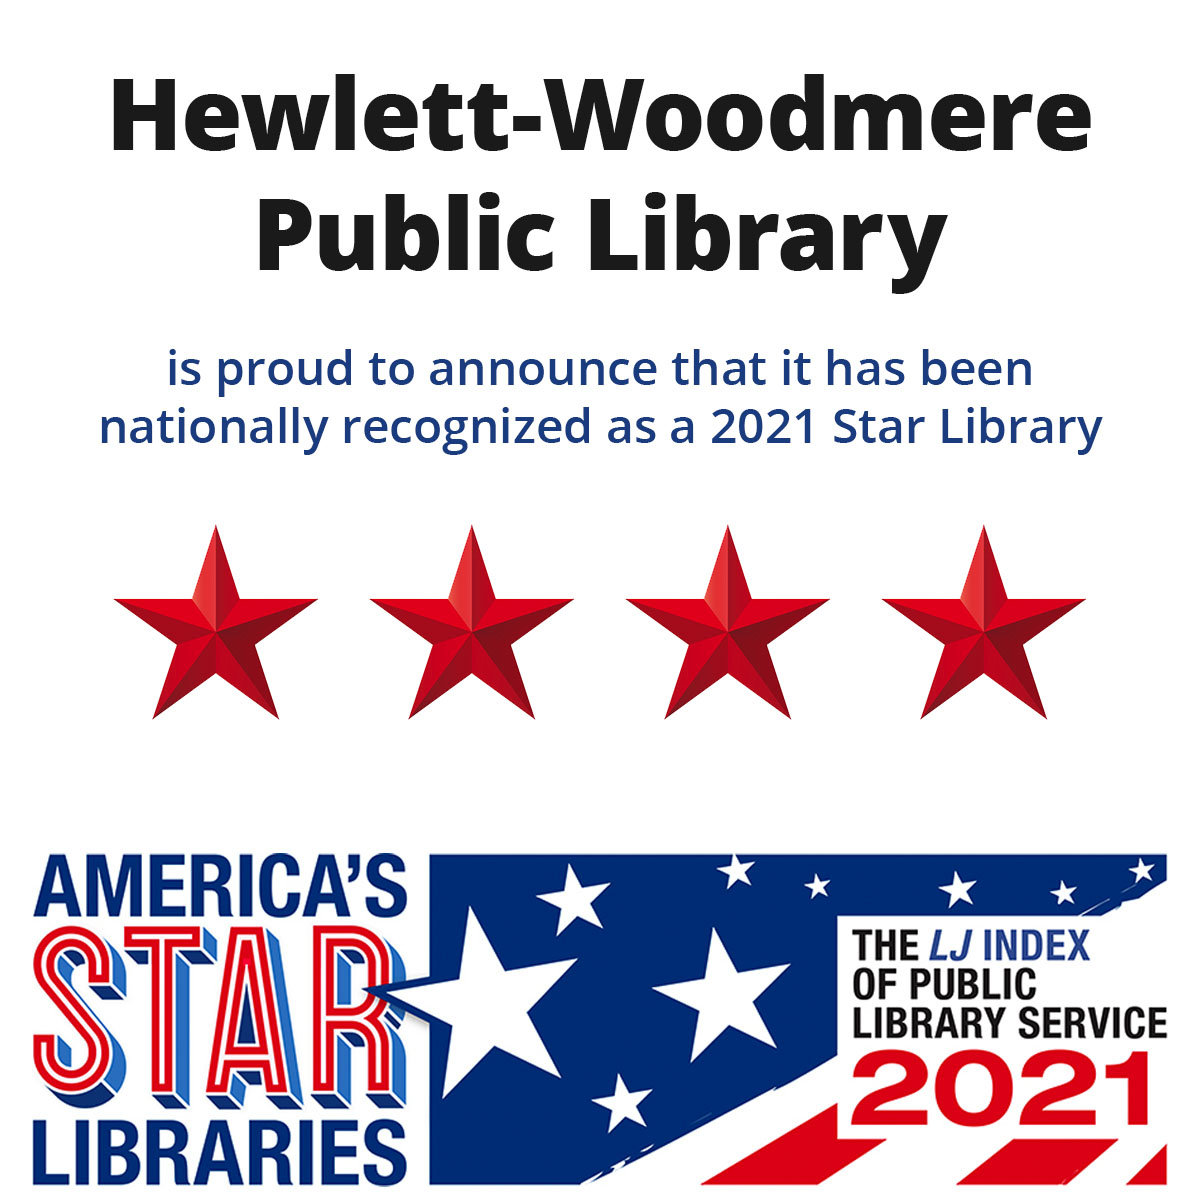 HewlettWoodmere Public Library is a Star Library awardwinner Herald